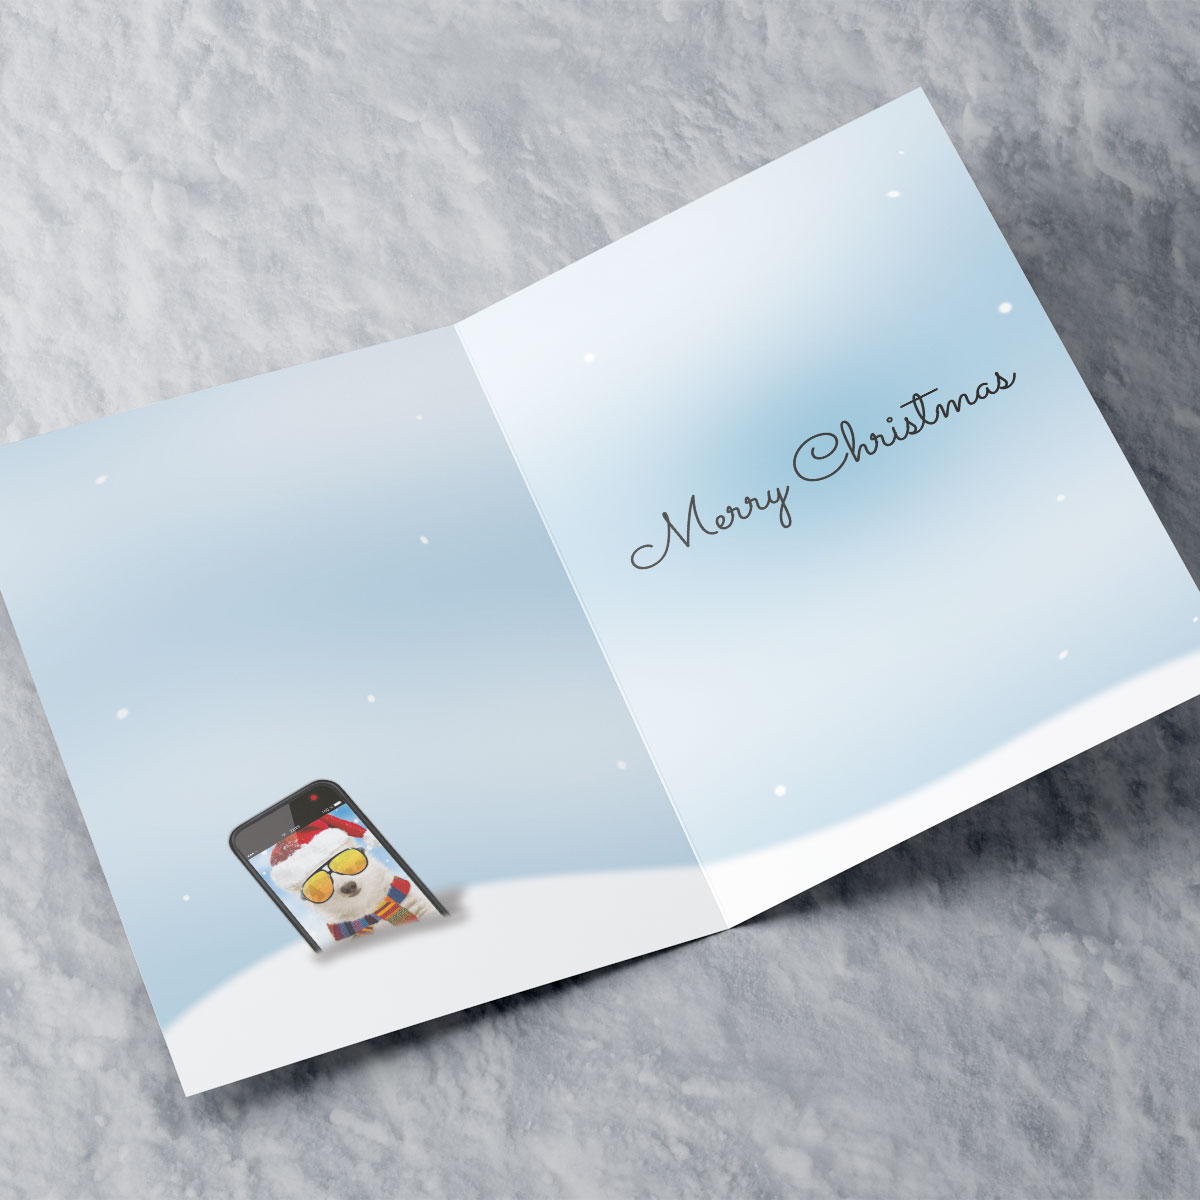 Personalised Christmas Card - Have Your Selfie A Merry Christmas